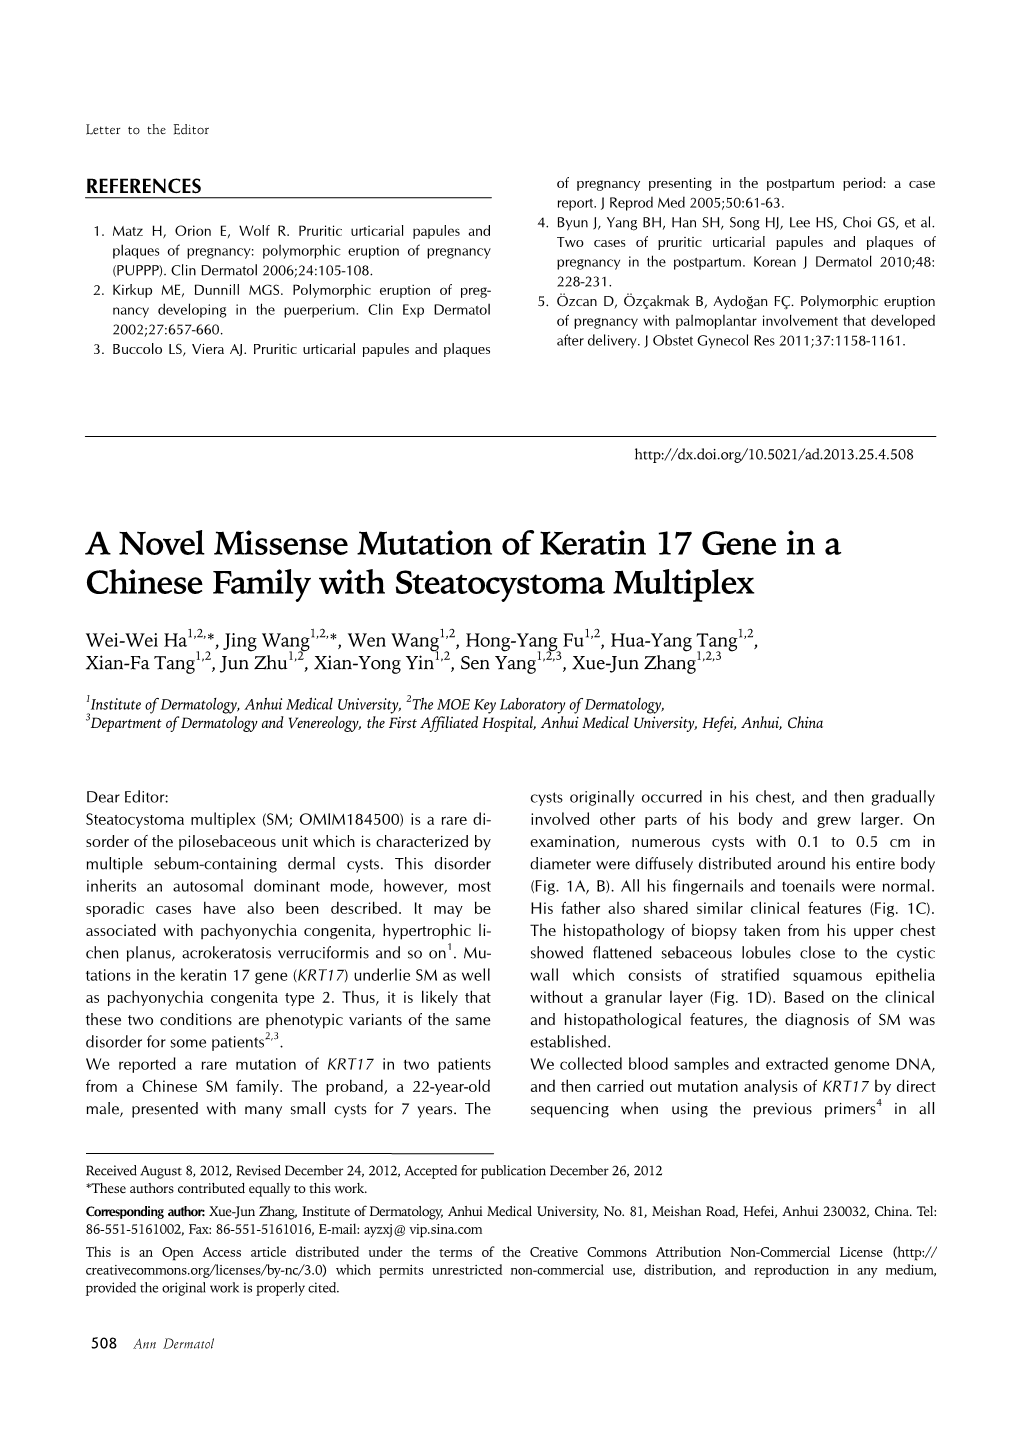 A Novel Missense Mutation of Keratin 17 Gene in a Chinese Family with Steatocystoma Multiplex